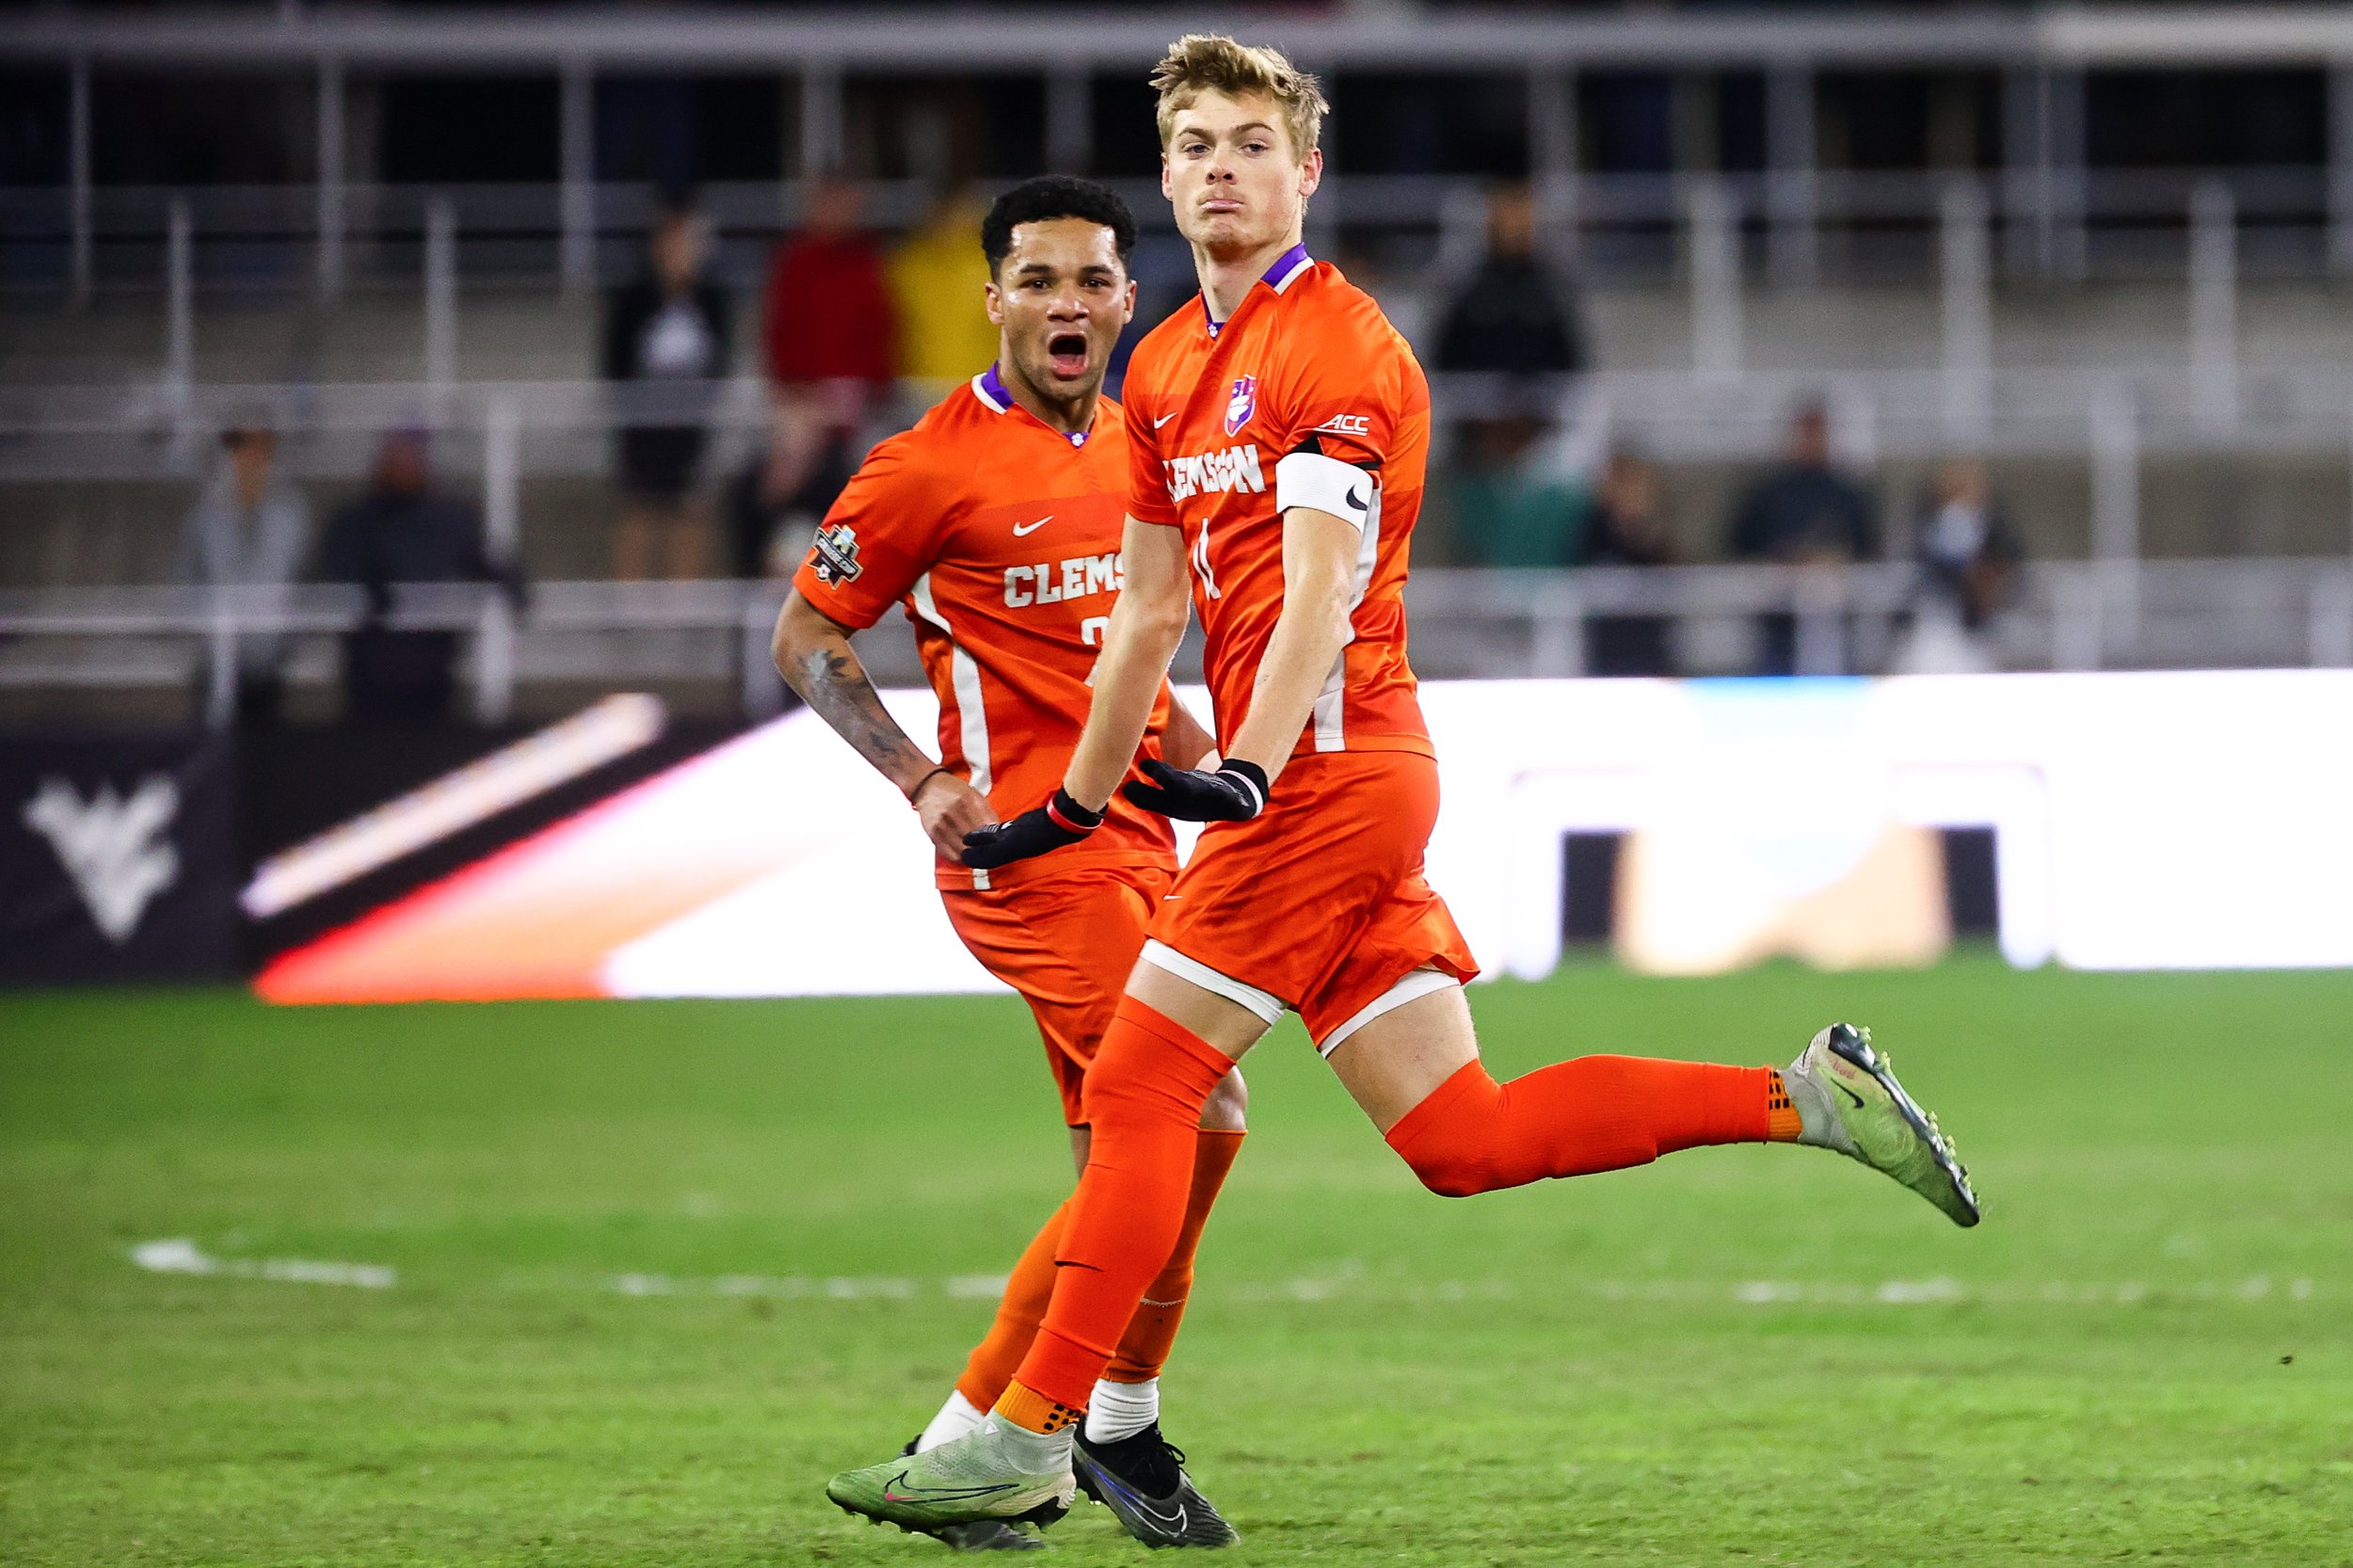  LOUISVILLE, KENTUCKY - DECEMBER 11: Shawn Smart #20 and Brandon Parrish #11 of the Clemson Tigers celebrates a goal against the Notre Dame Fighting Irish during the Division I Men’s Soccer Championship held at the Lynn Family Stadium on December 11,